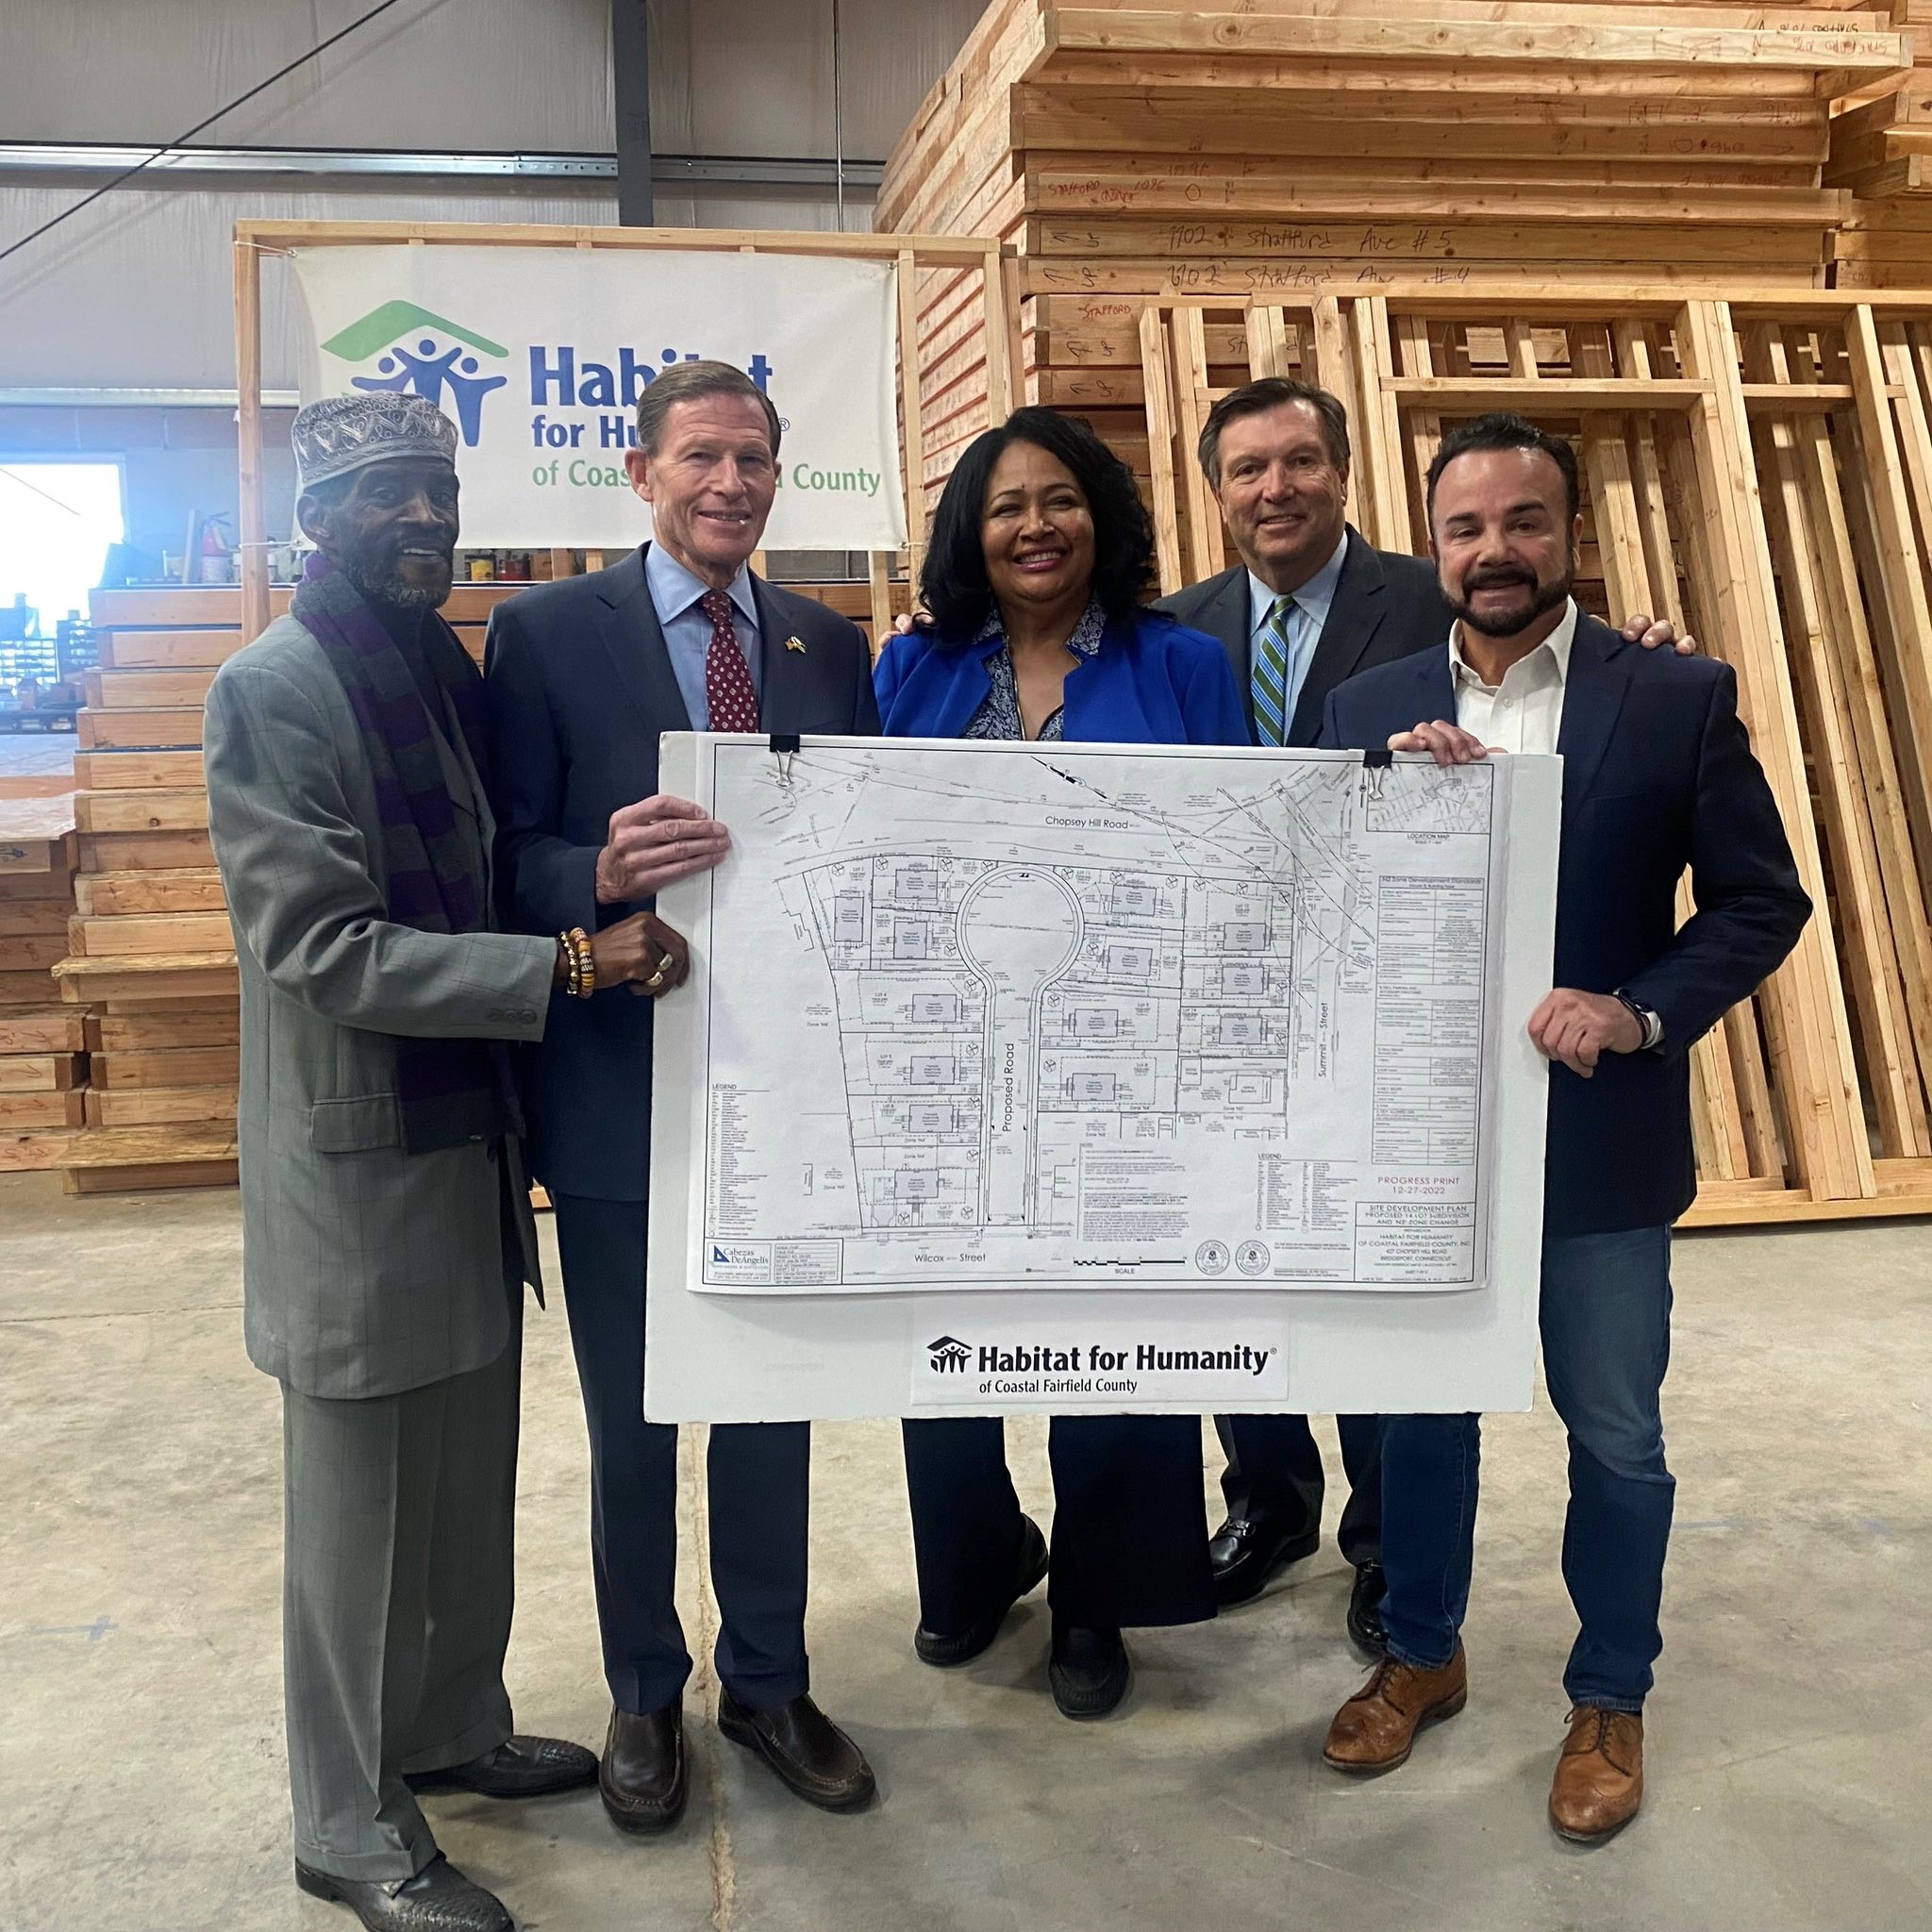 Blumenthal announced $2 million in federal funding for Habitat for Humanity of Coastal Fairfield County to build 10 affordable homes in Bridgeport. 